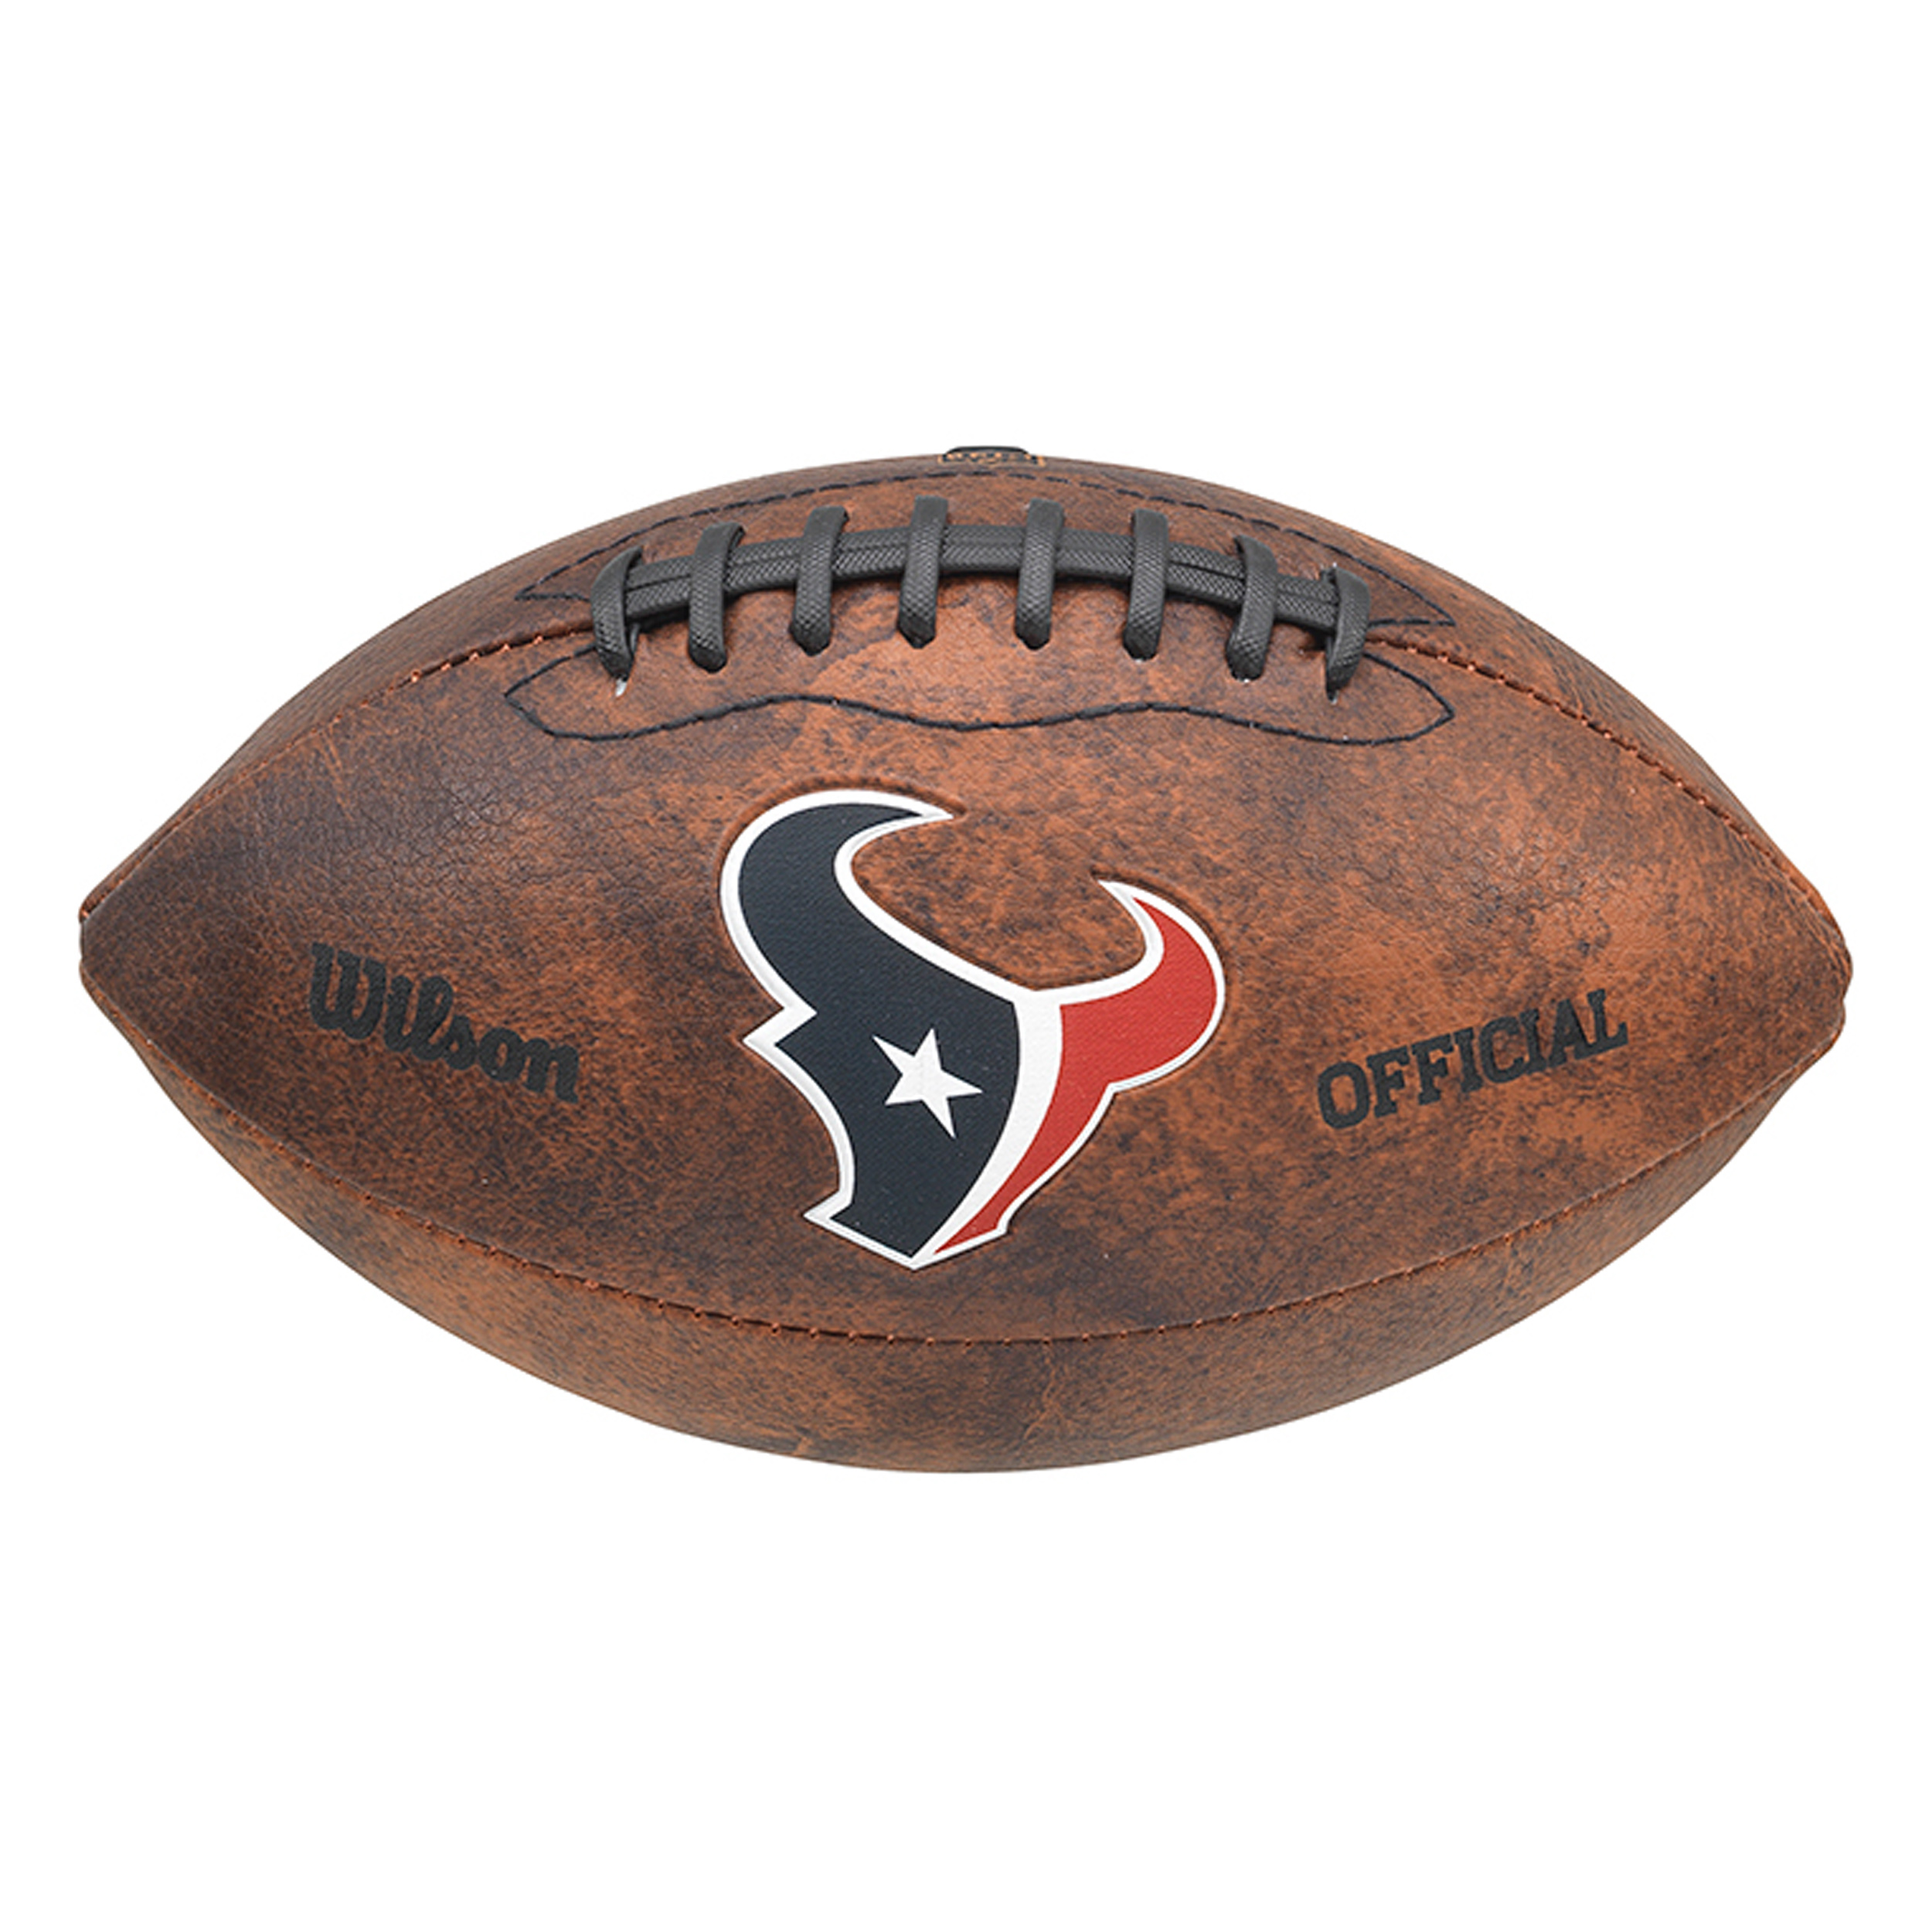 Wilson - NFL 9 Inch Color Throwback Football, Houston Texans - image 1 of 2